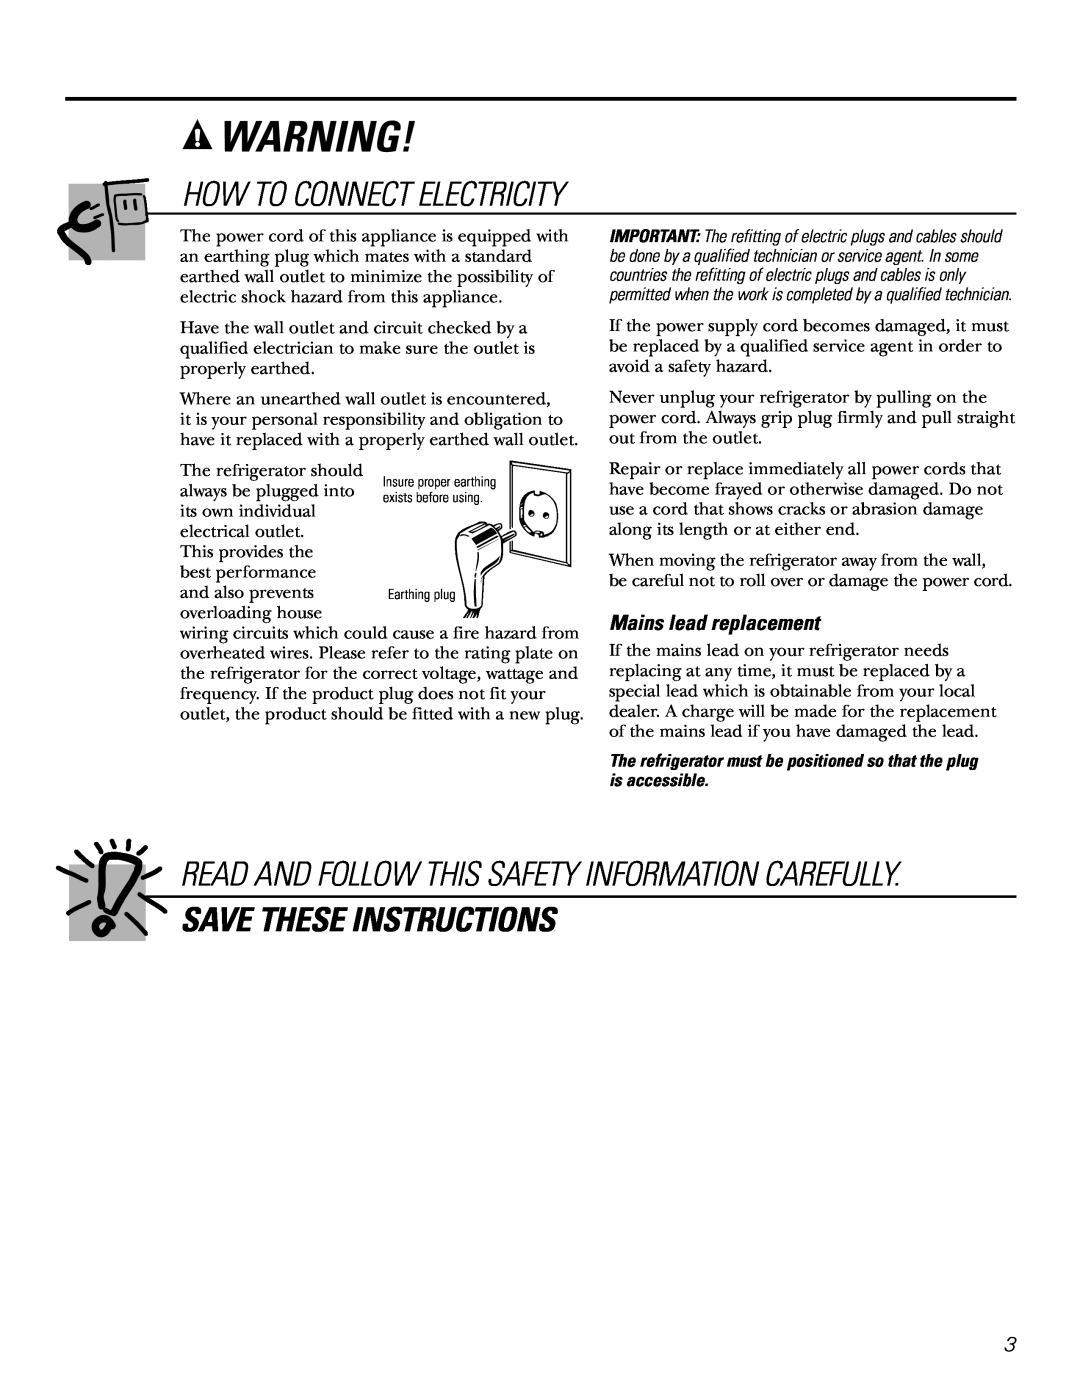 GE 21, 23, 25, 27, 29 installation instructions How To Connect Electricity, Save These Instructions, Mains lead replacement 